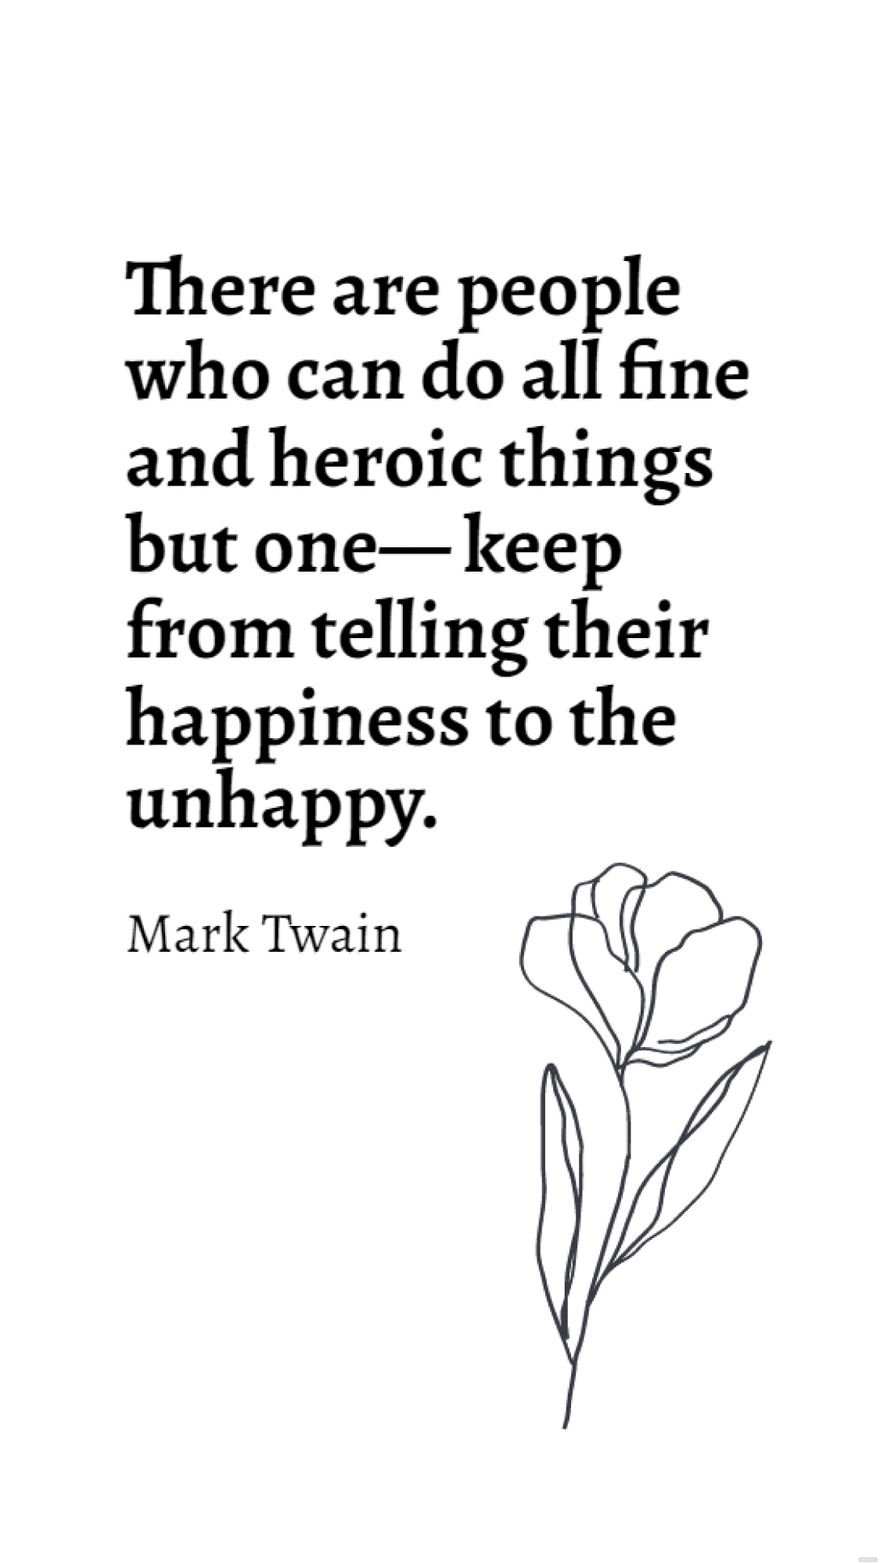 Free Mark Twain - There are people who can do all fine and heroic things but one - keep from telling their happiness to the unhappy.